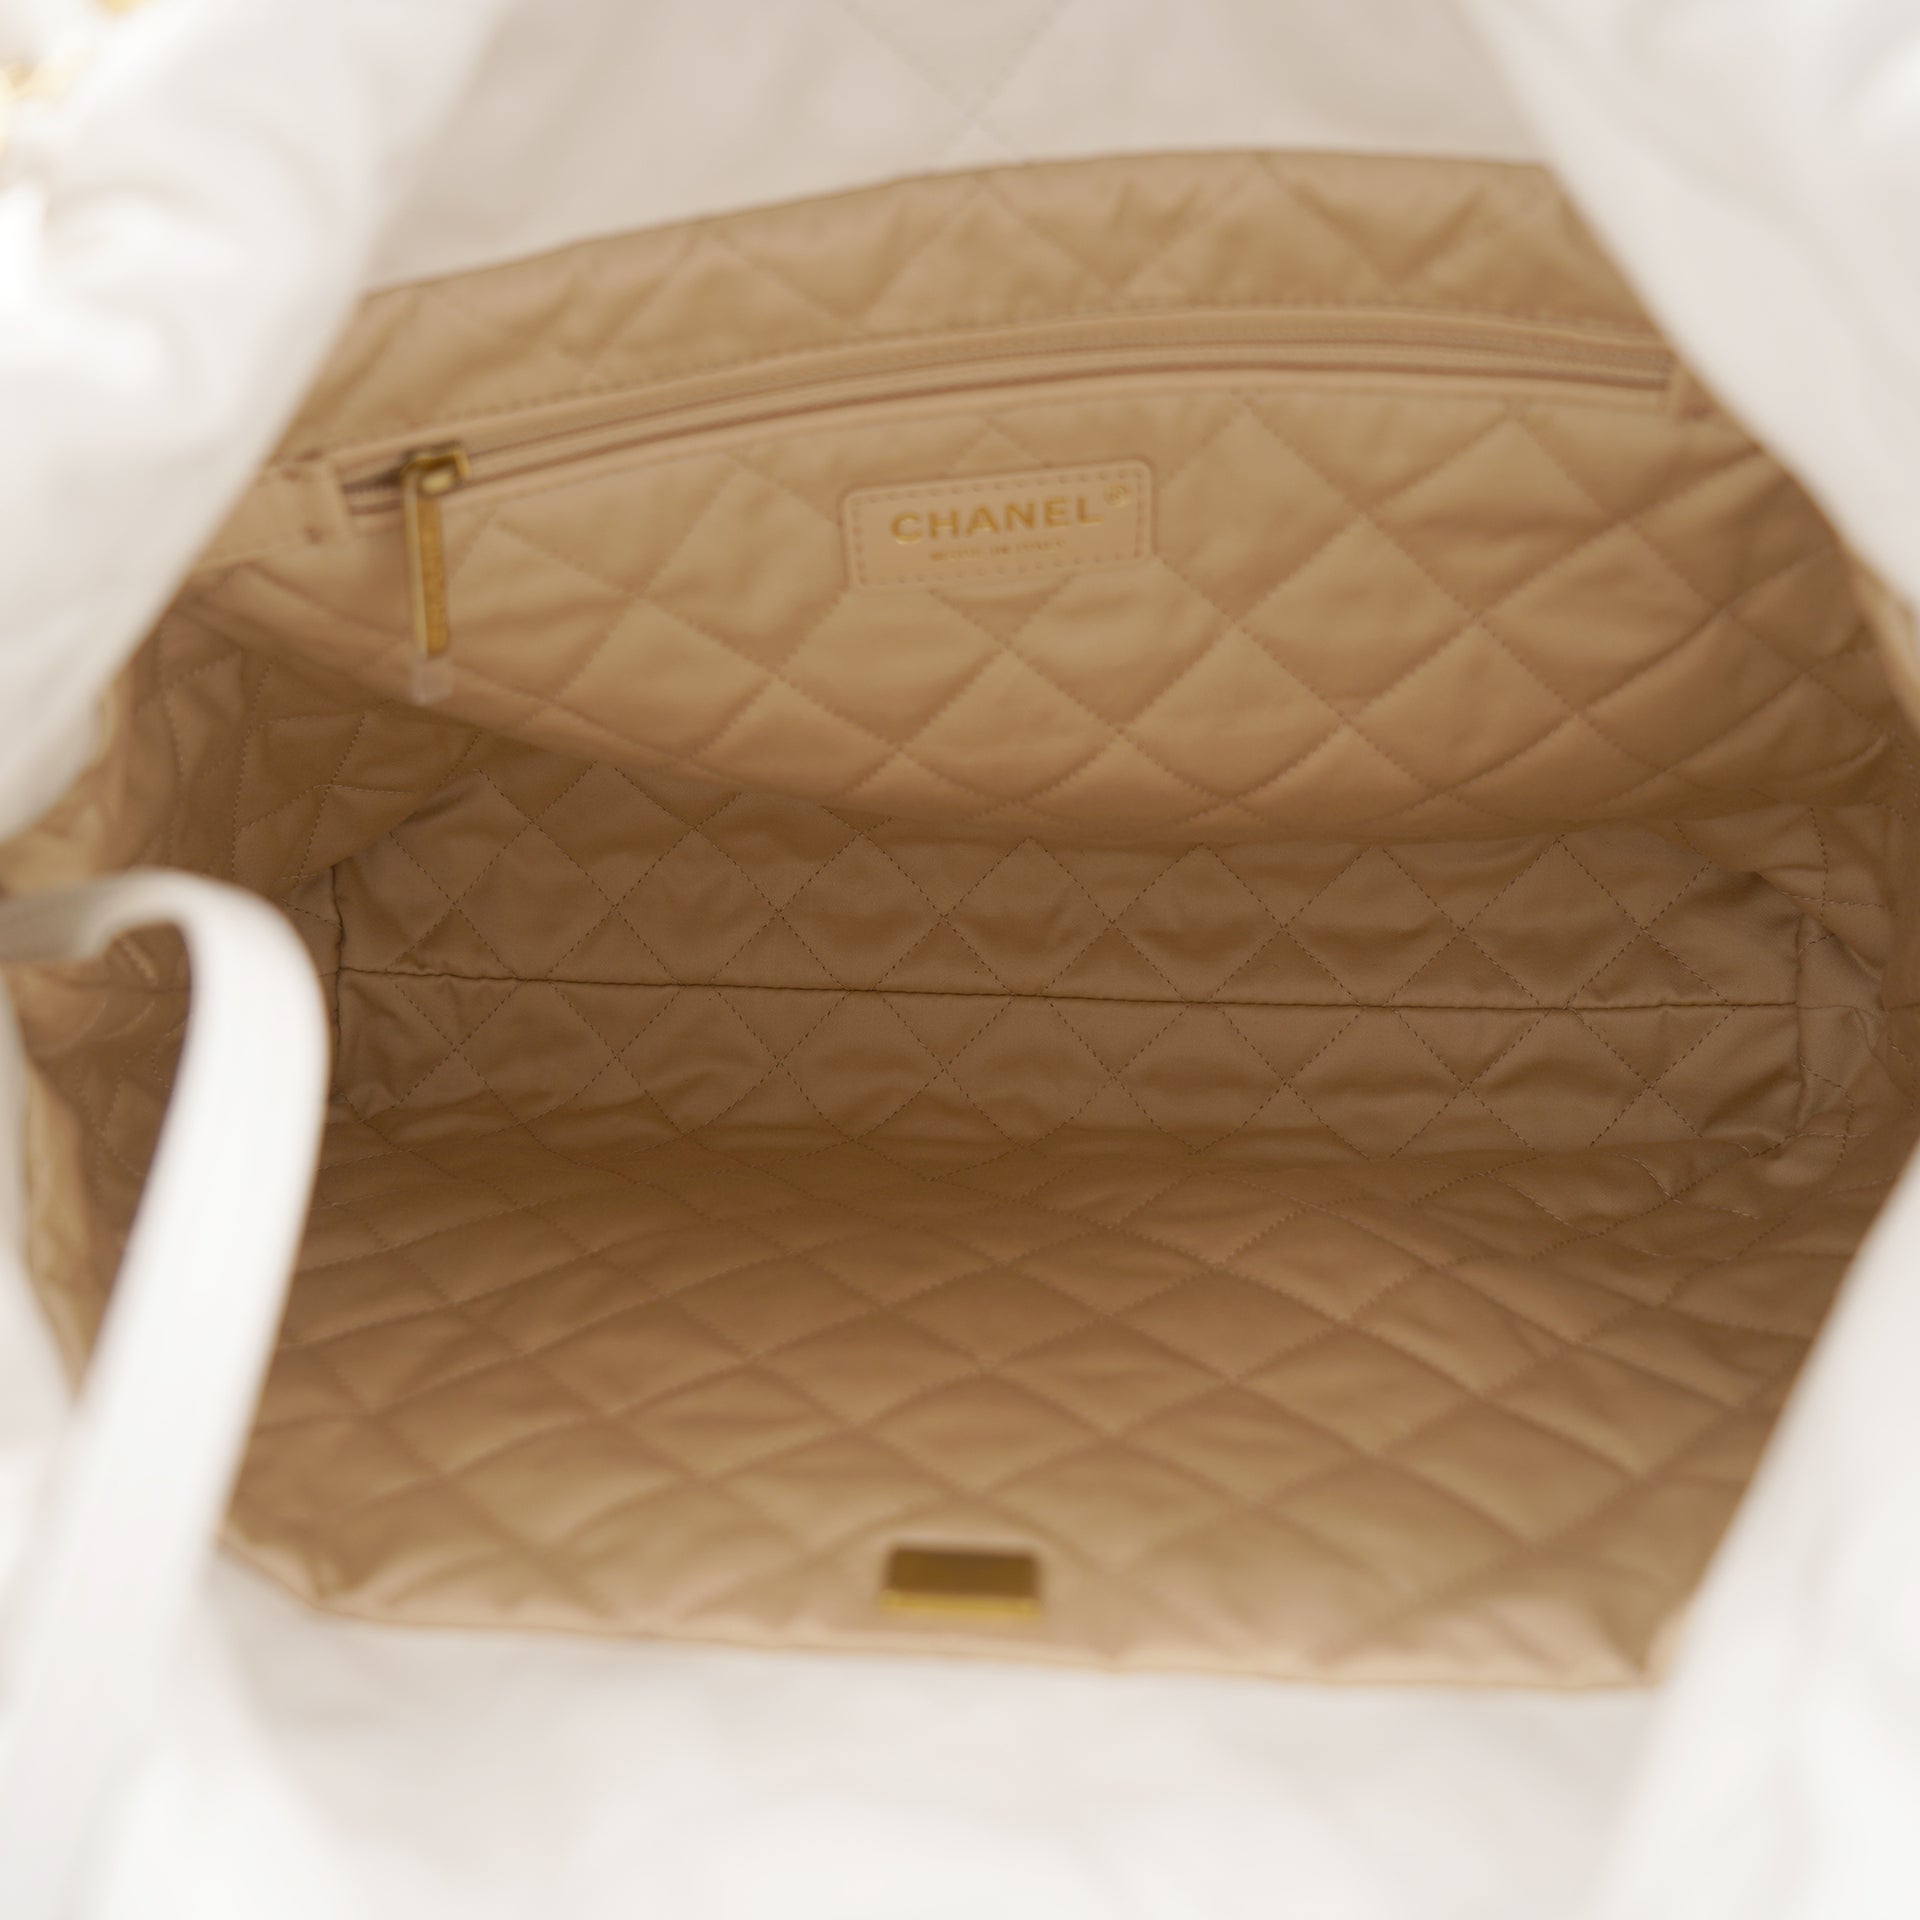 Chanel 22 Mini Quilted Hobo Tote, Rose Gold Calfskin with Gold